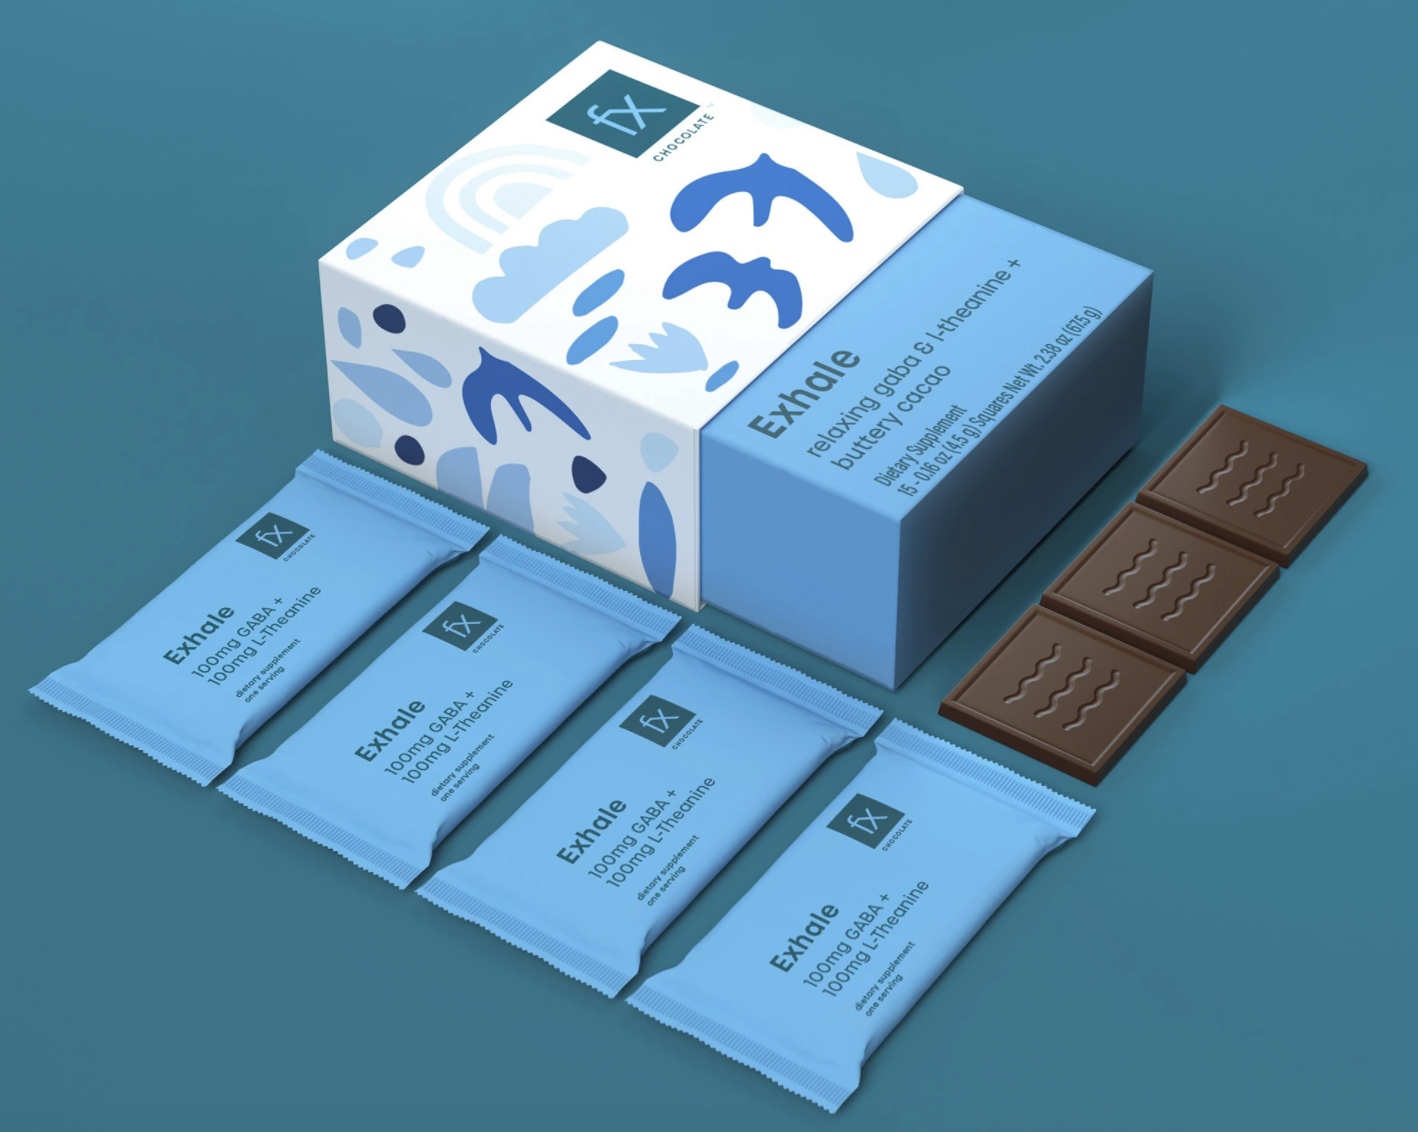 a box of chocolate on a blue background